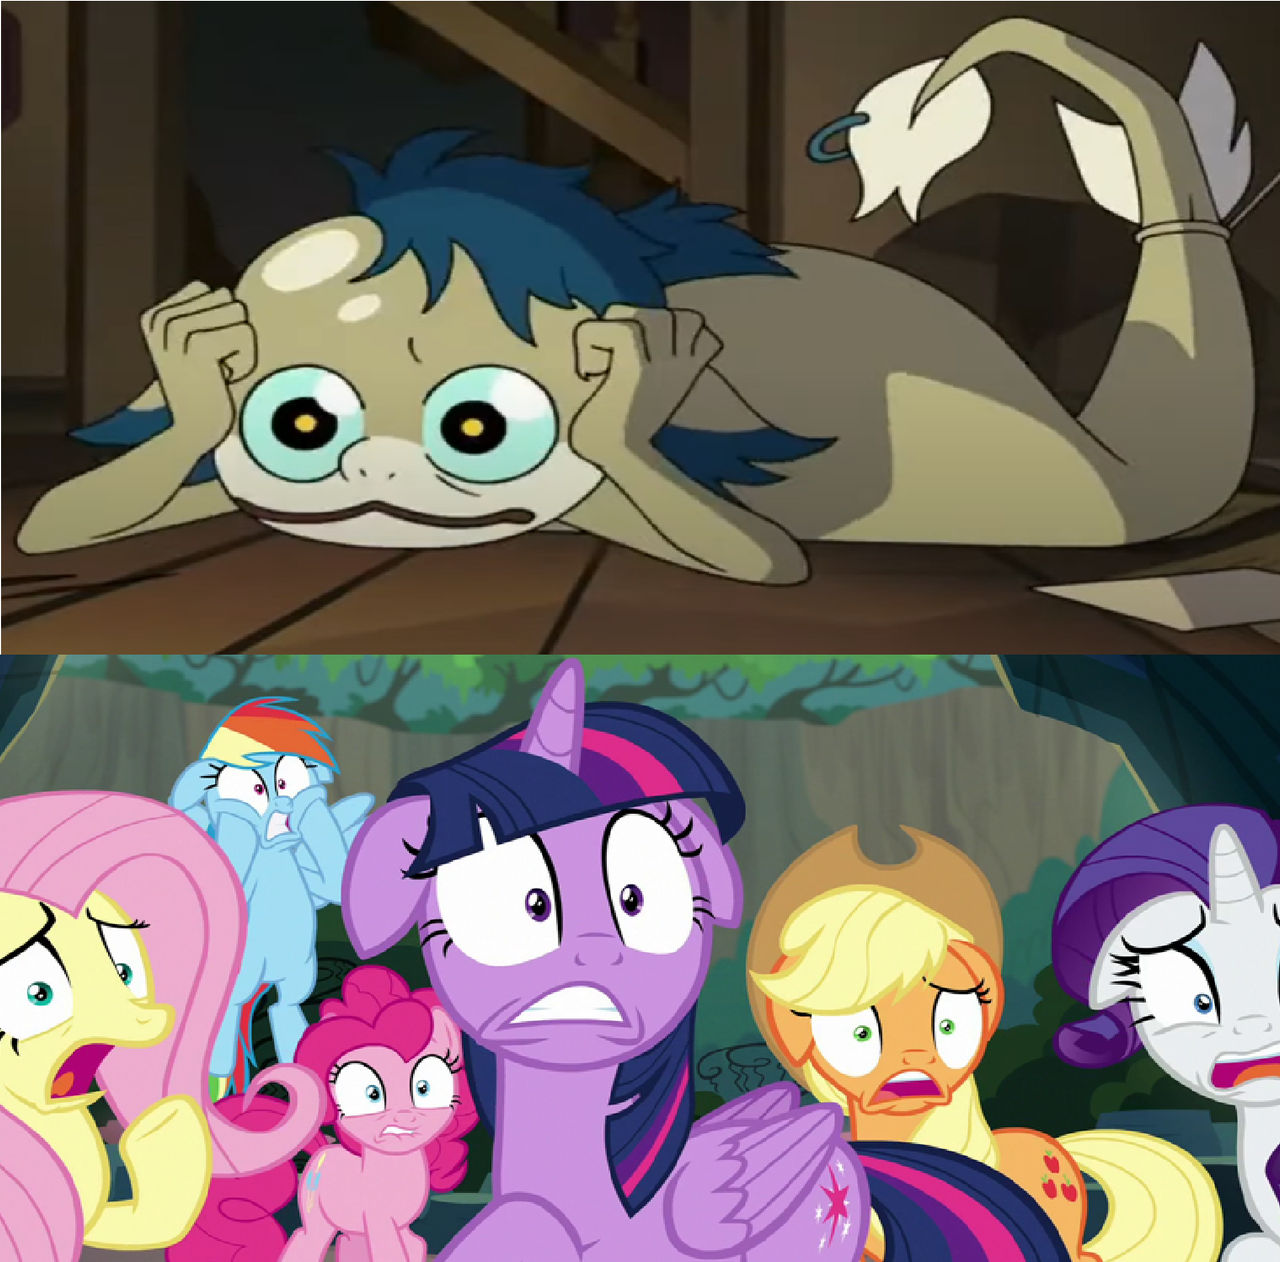 Mane 6 reacts to Vee's reveal by Disneyponyfan on DeviantArt